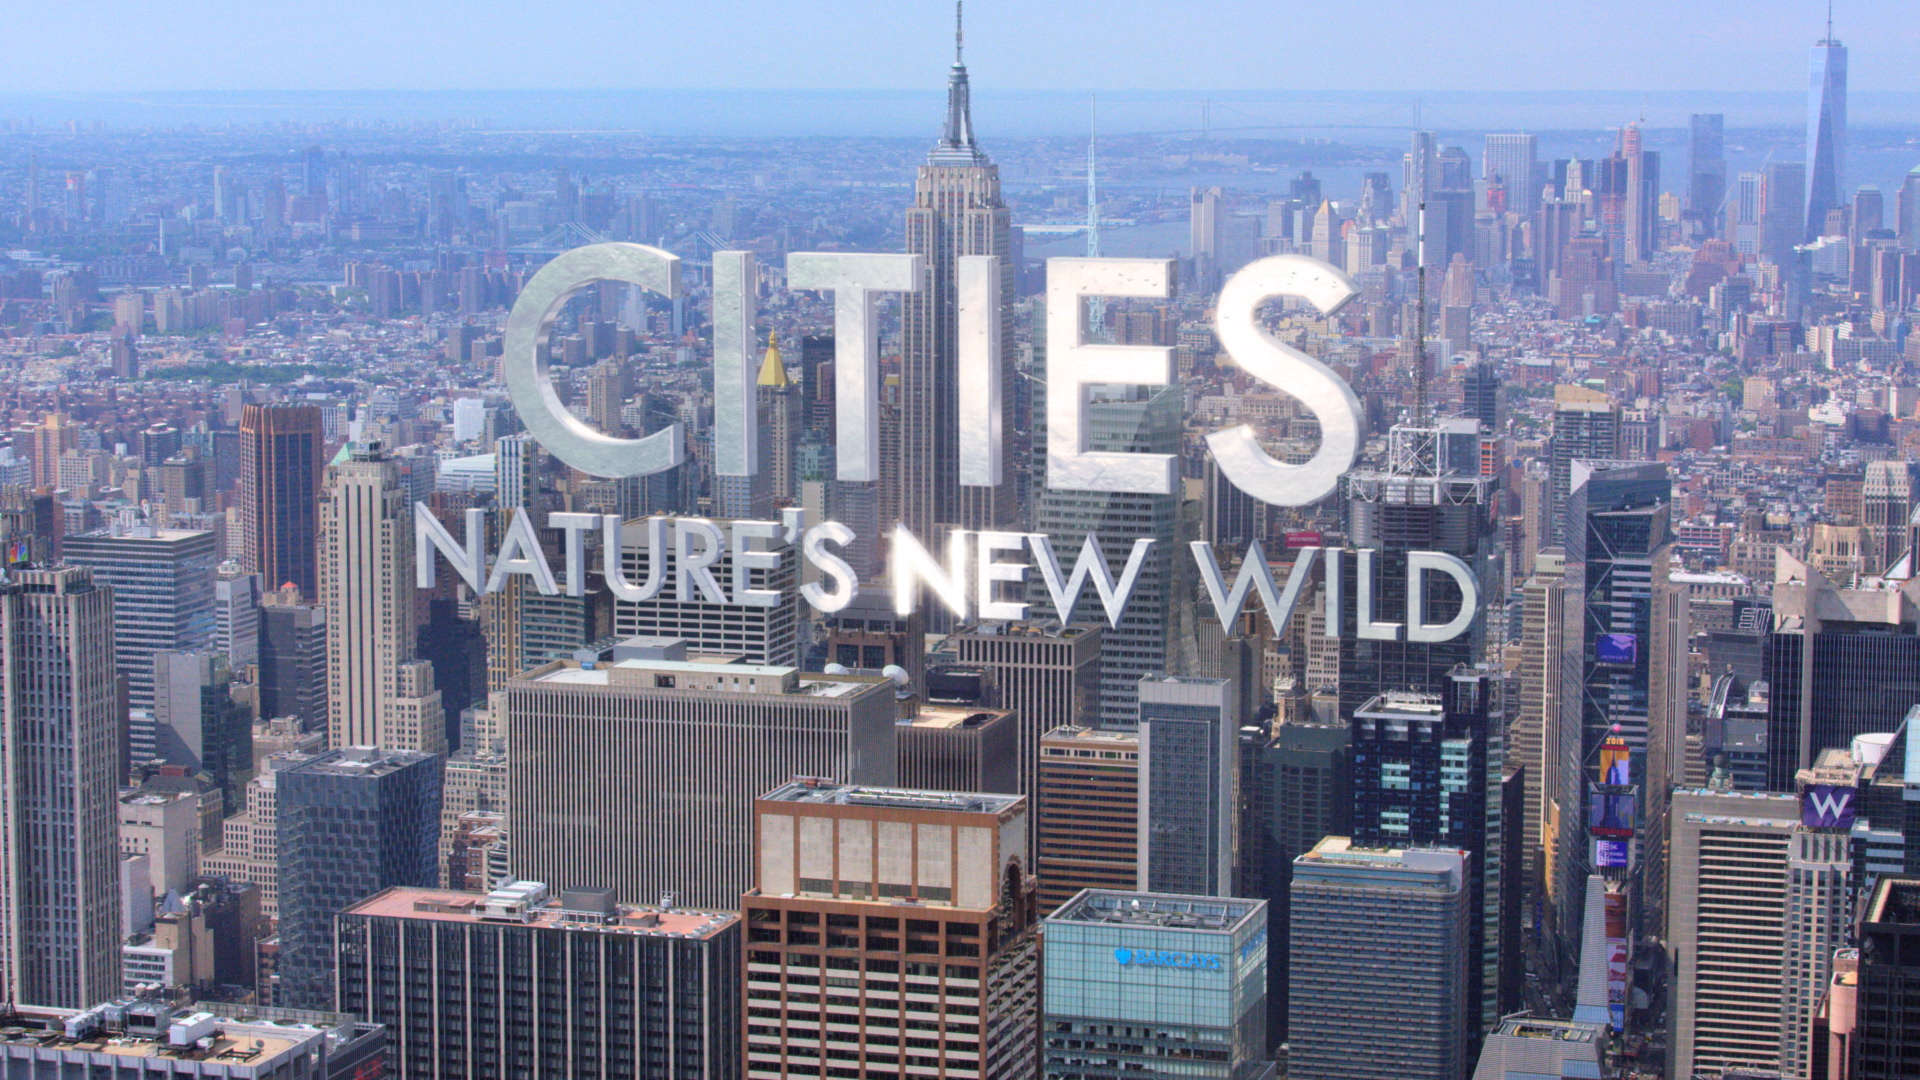 BBC - Cities: Nature's New Wild (flying foxes)